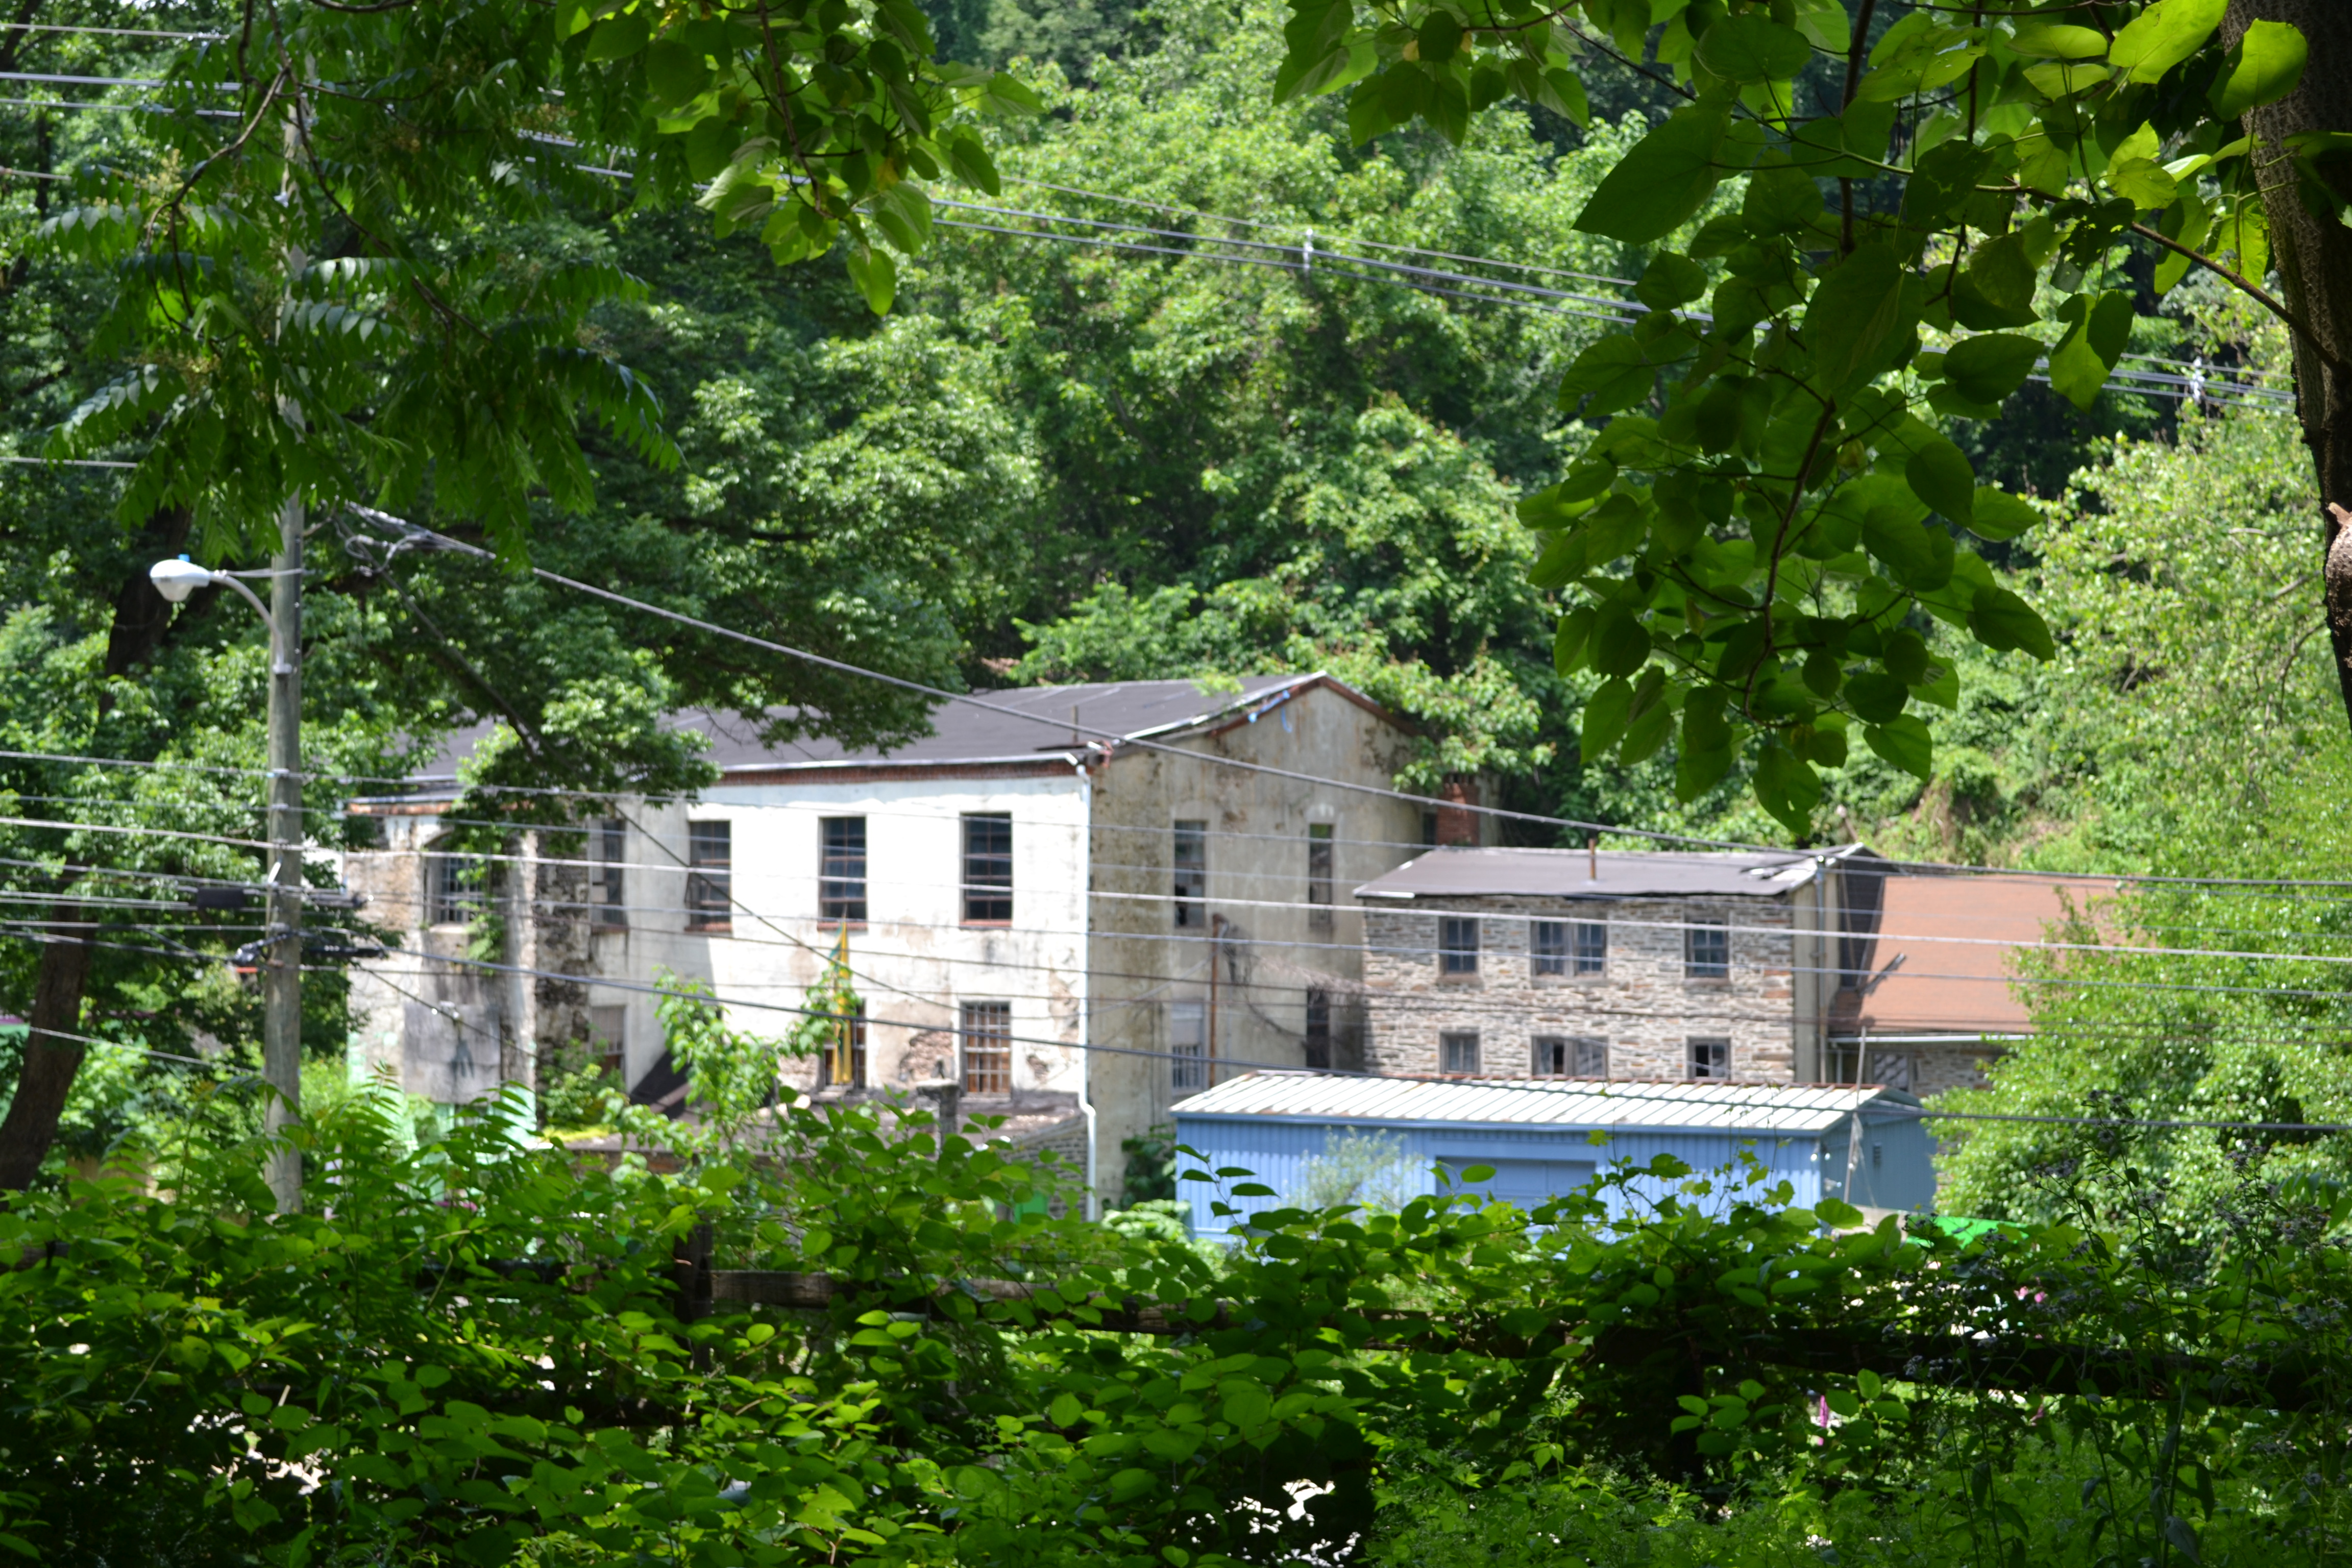 An abandoned mill building stands across from the Rock Hill Road and Belmont Ave end of the trail